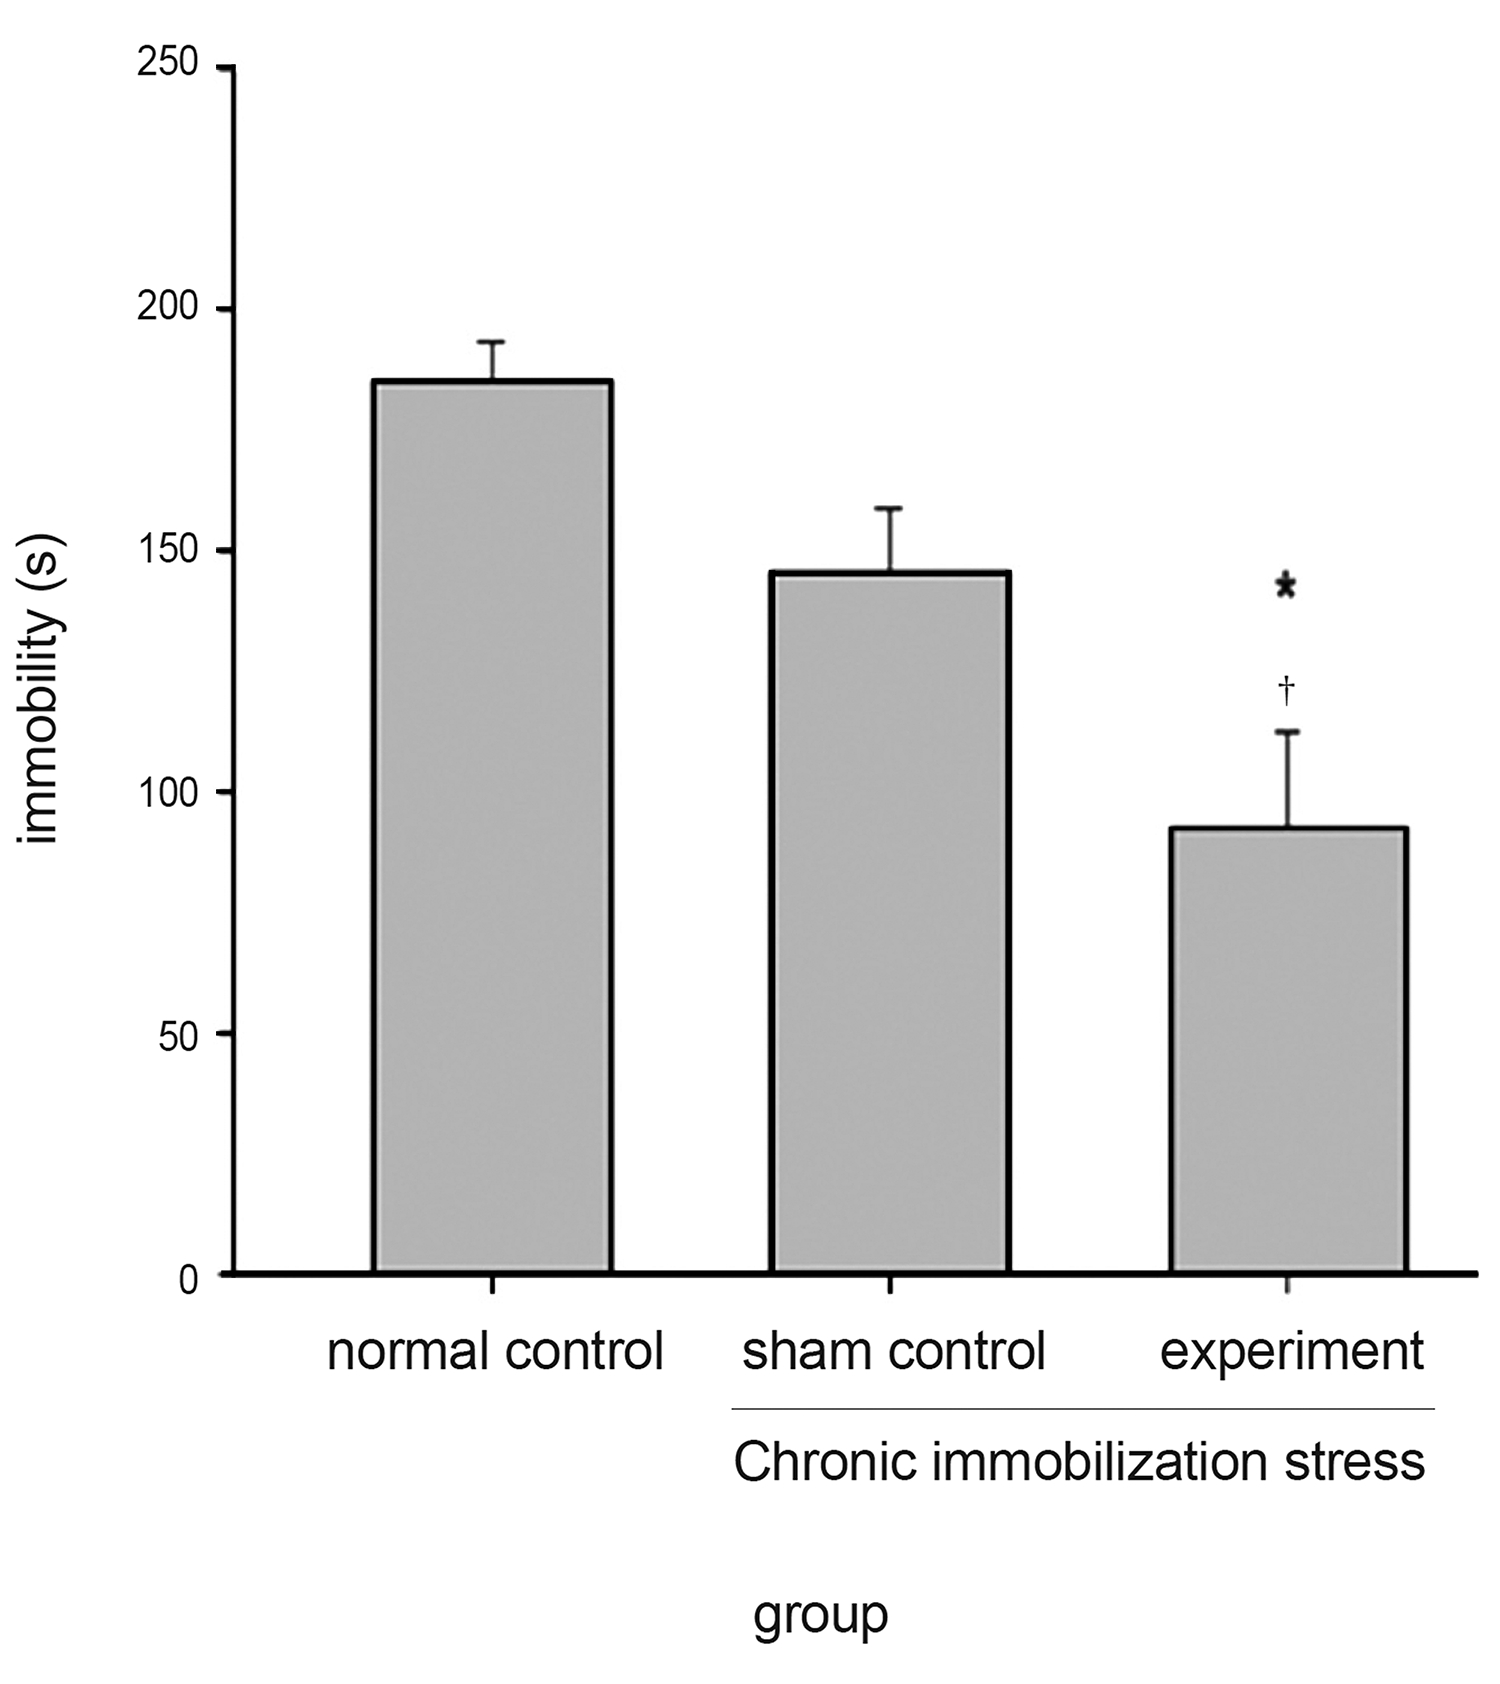 Antidepressant-like effects of Sumsu pharmacopuncture after
2 weeks of chronic immobilization stress in the forced swimming
test. The animals were divided into three groups of eight animals
each; *P < 0.05 vs. sham control, †P < 0.01 vs. normal control group.